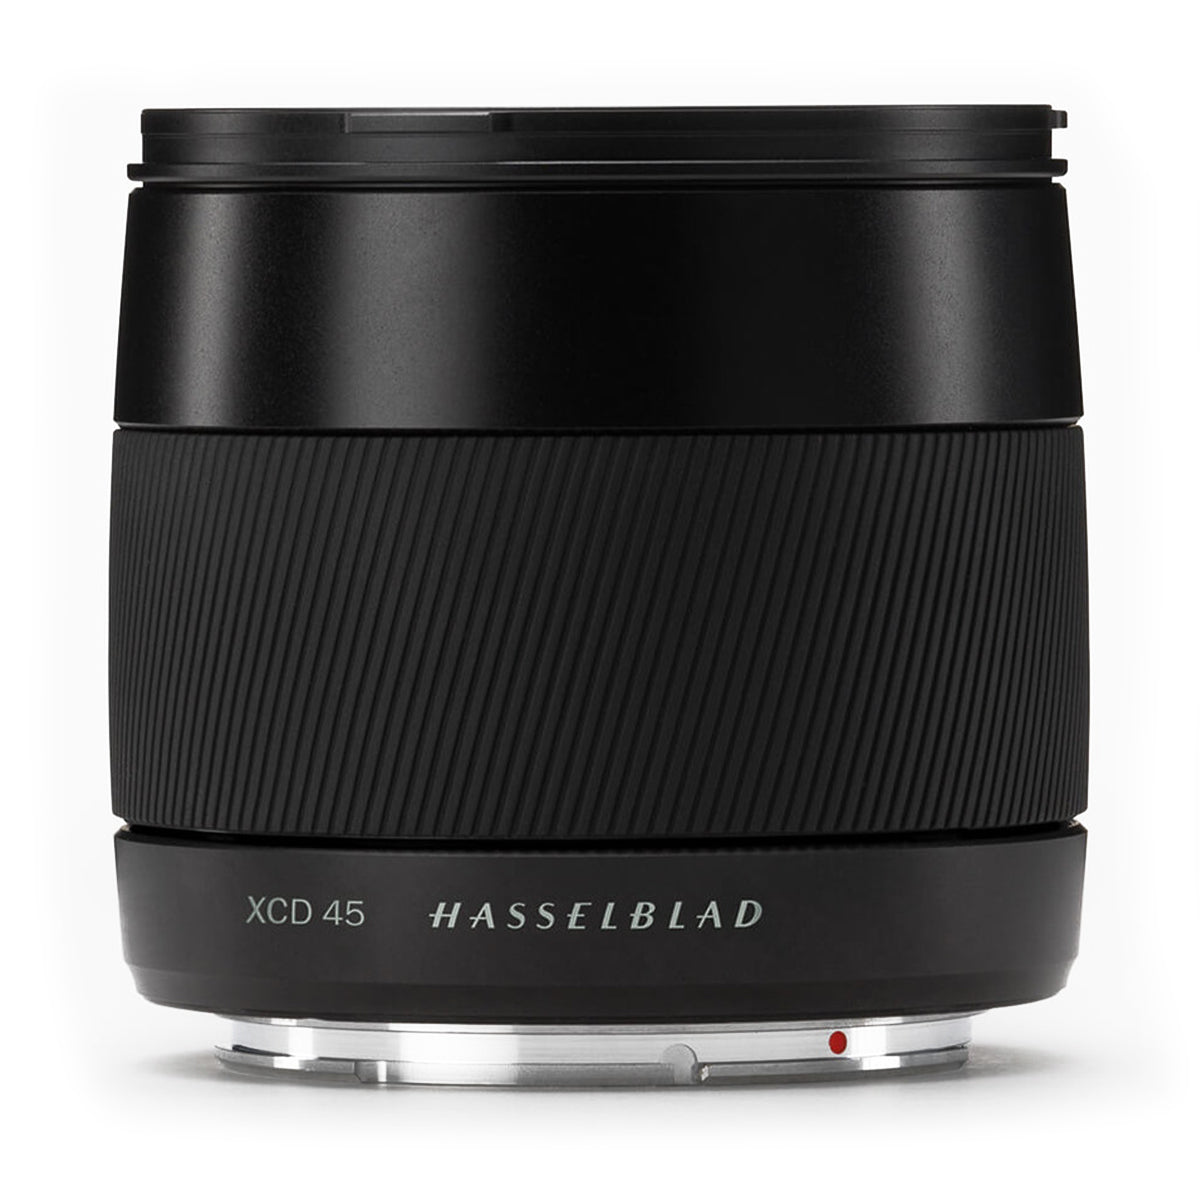 Hasselblad XCD 45mm f3.5 lens